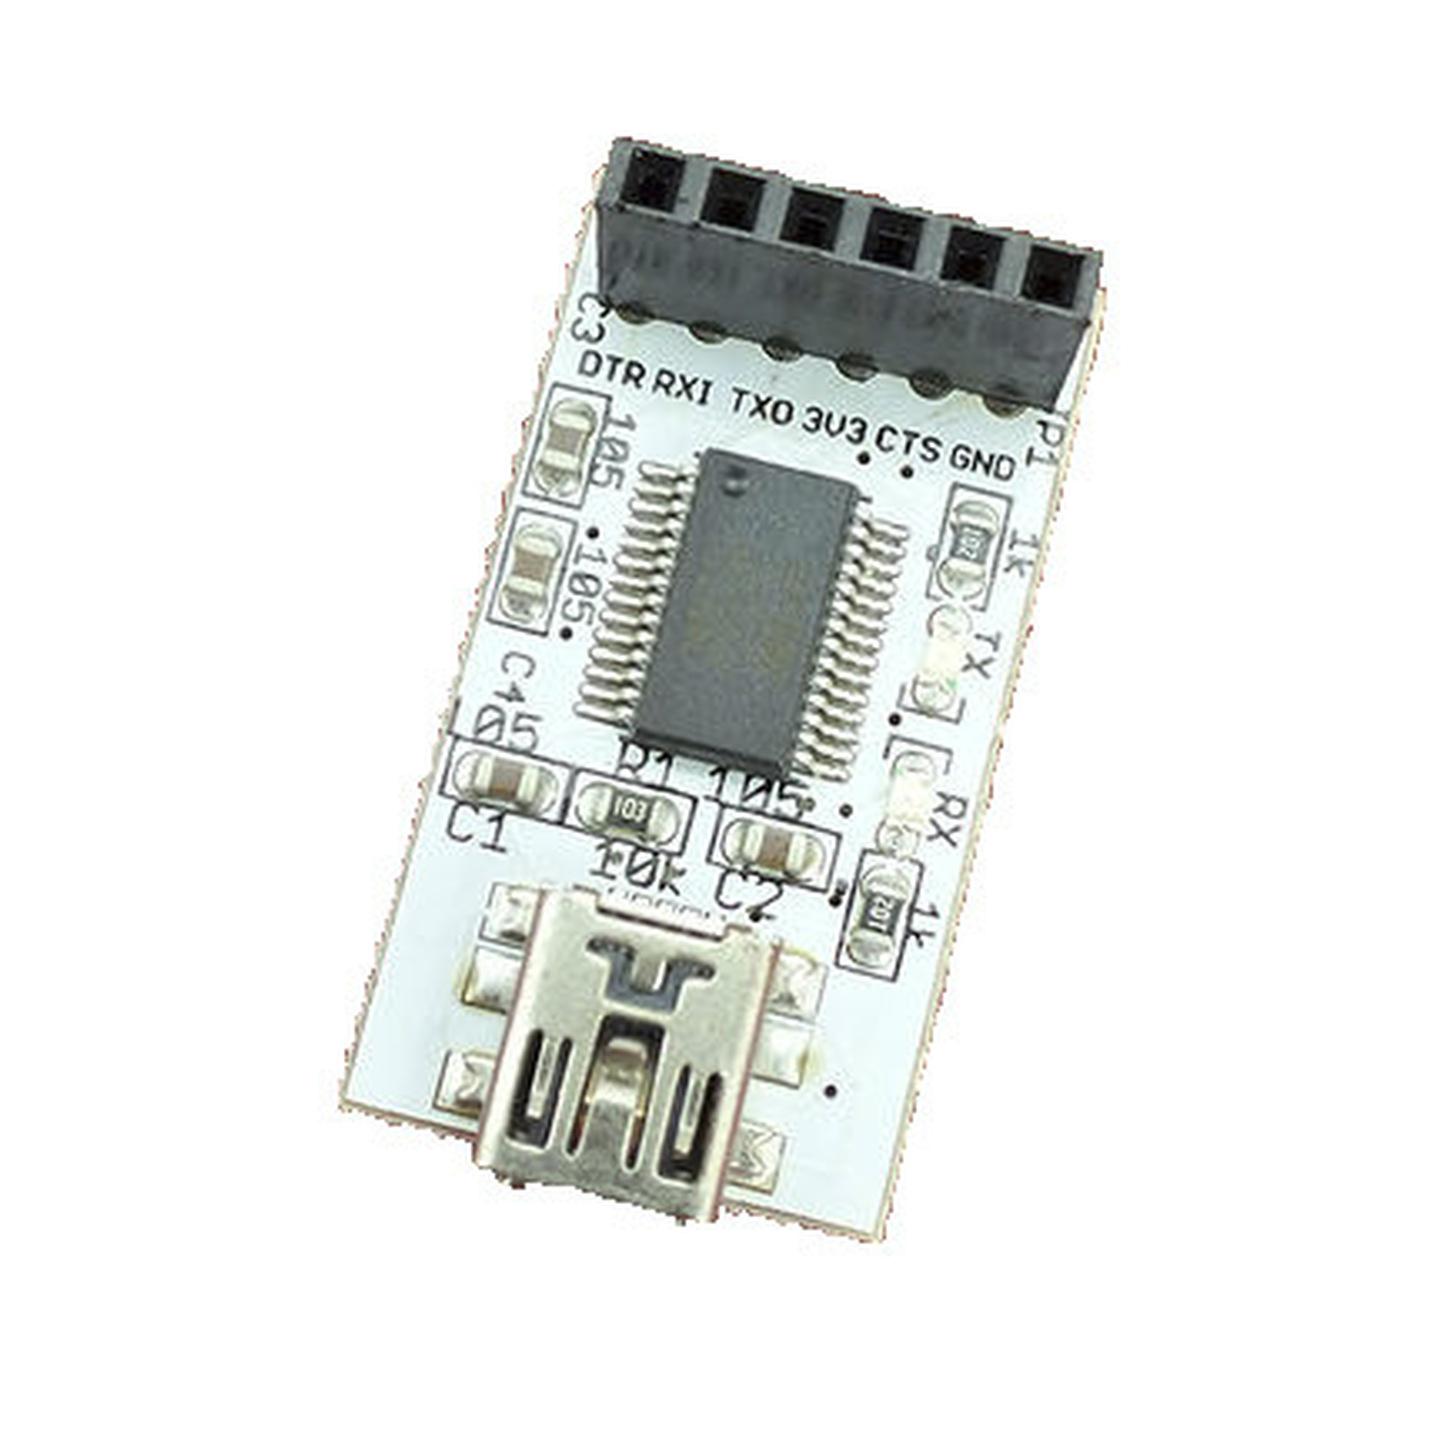 FT232 USB to Serial Breakout Board for Arduino